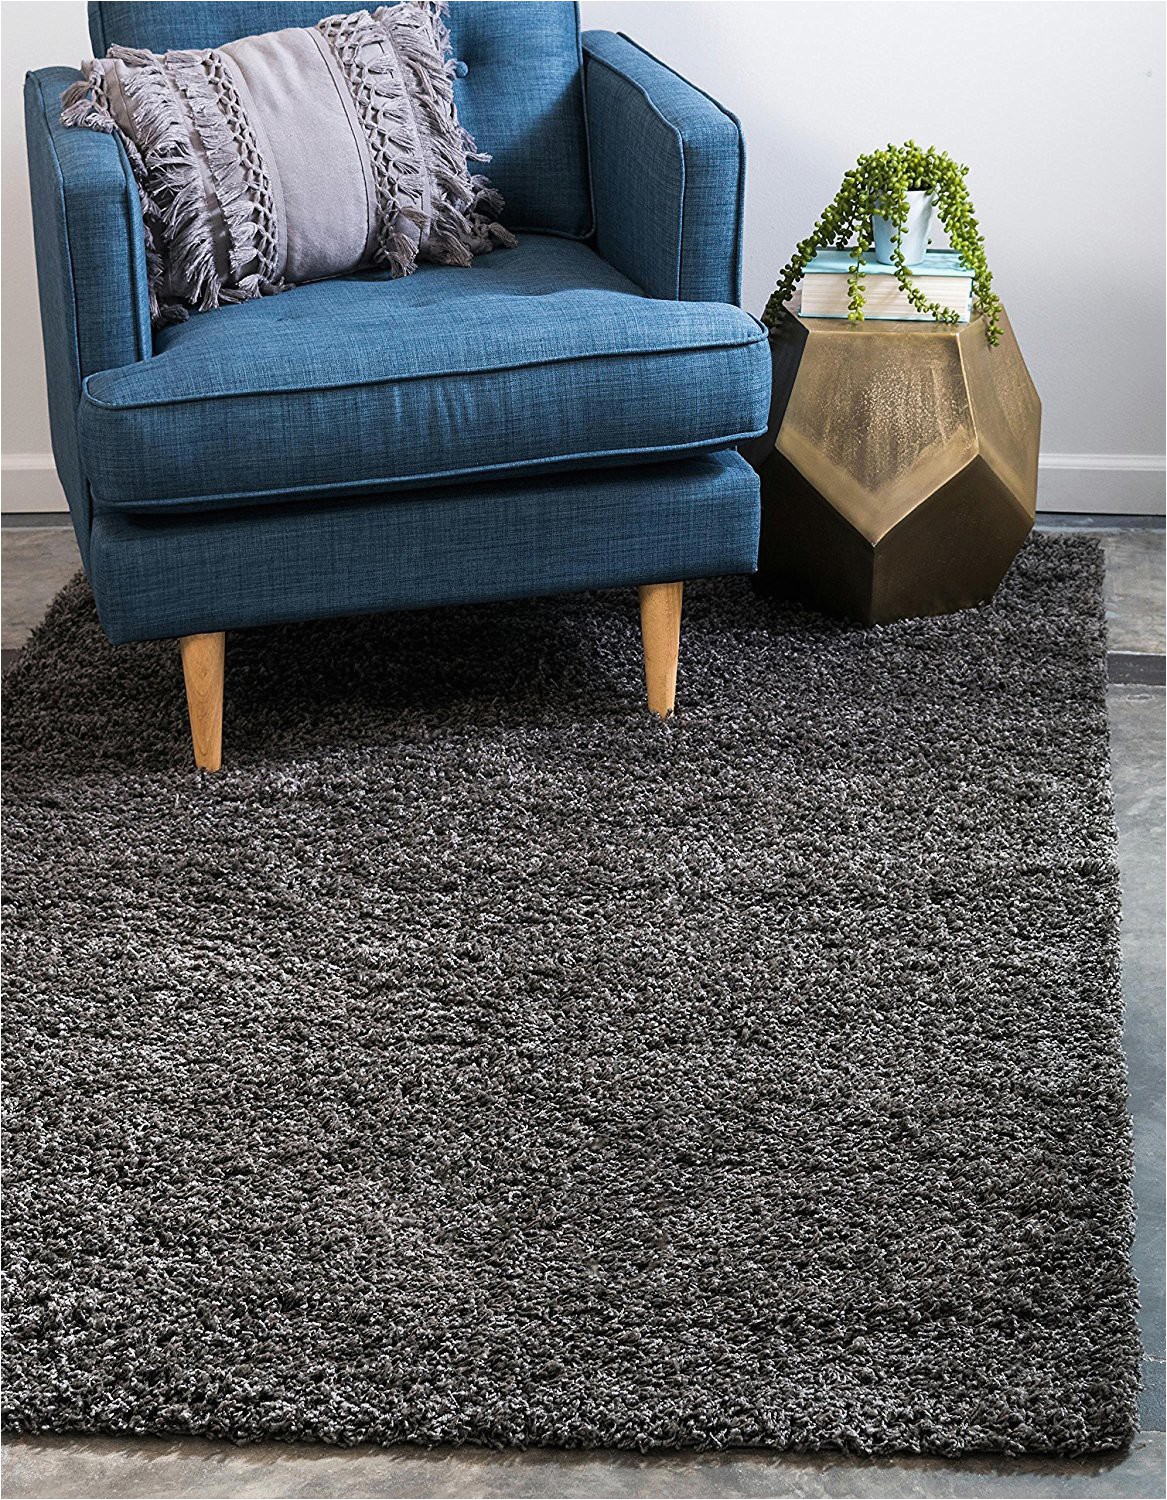 Extra Large Grey area Rug Bravich Rugmasters Dark Grey Extra Rug 5 Cm Thick Shag Pile soft Shaggy area Rugs Modern Carpet Living Room Bedroom Mats 160 X 230 Cm 5 3" X